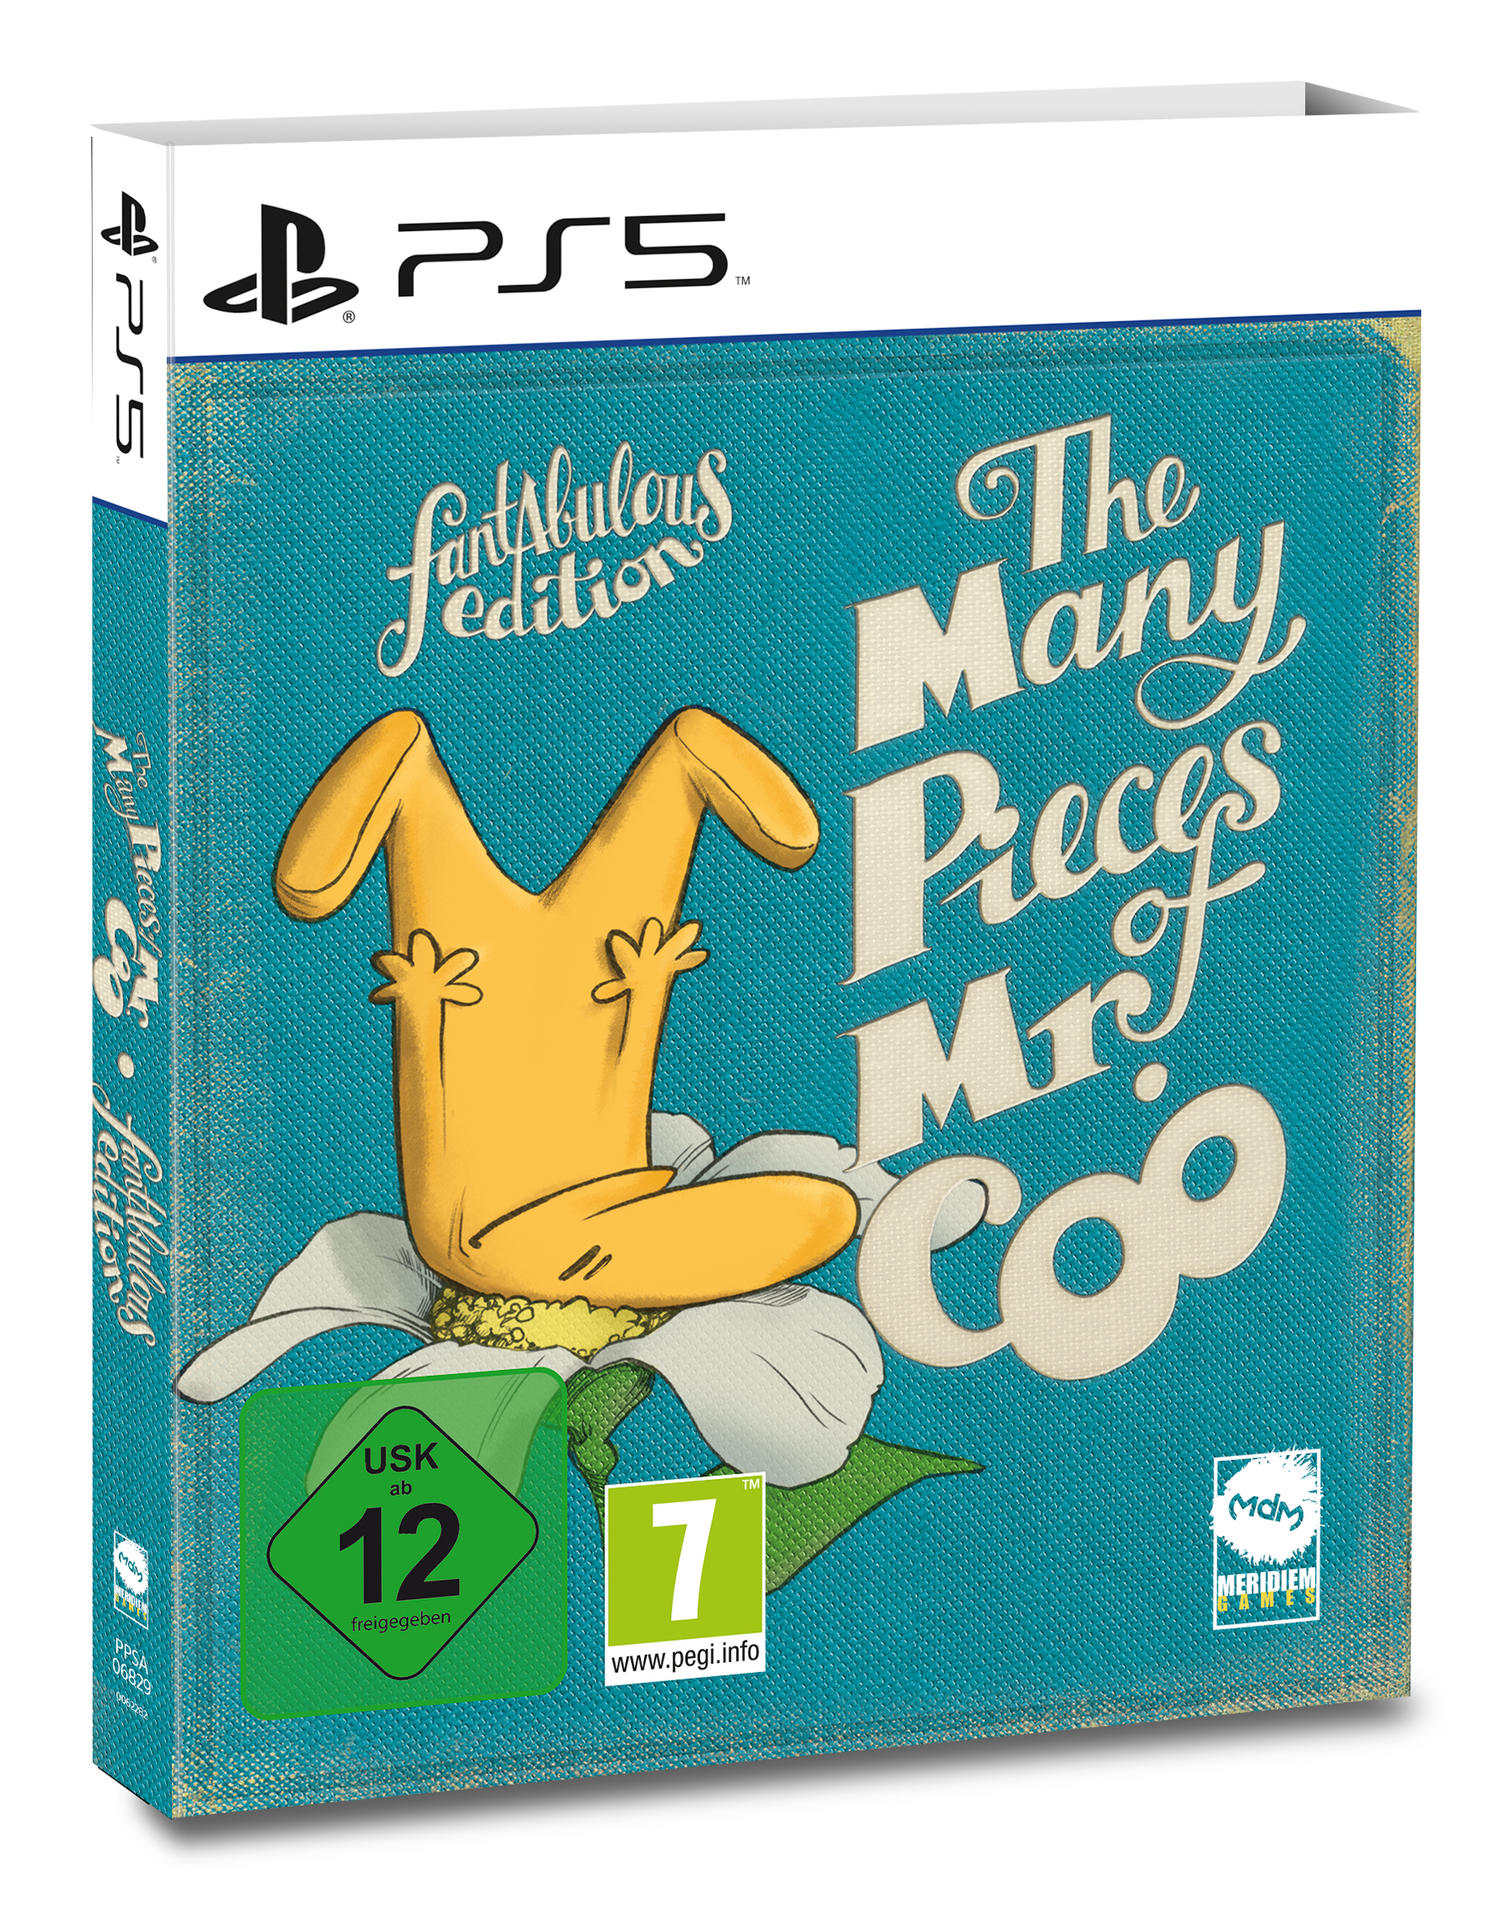 [PlayStation Pieces of 5] The - Many Coo Fantabulous Mr. - Edition